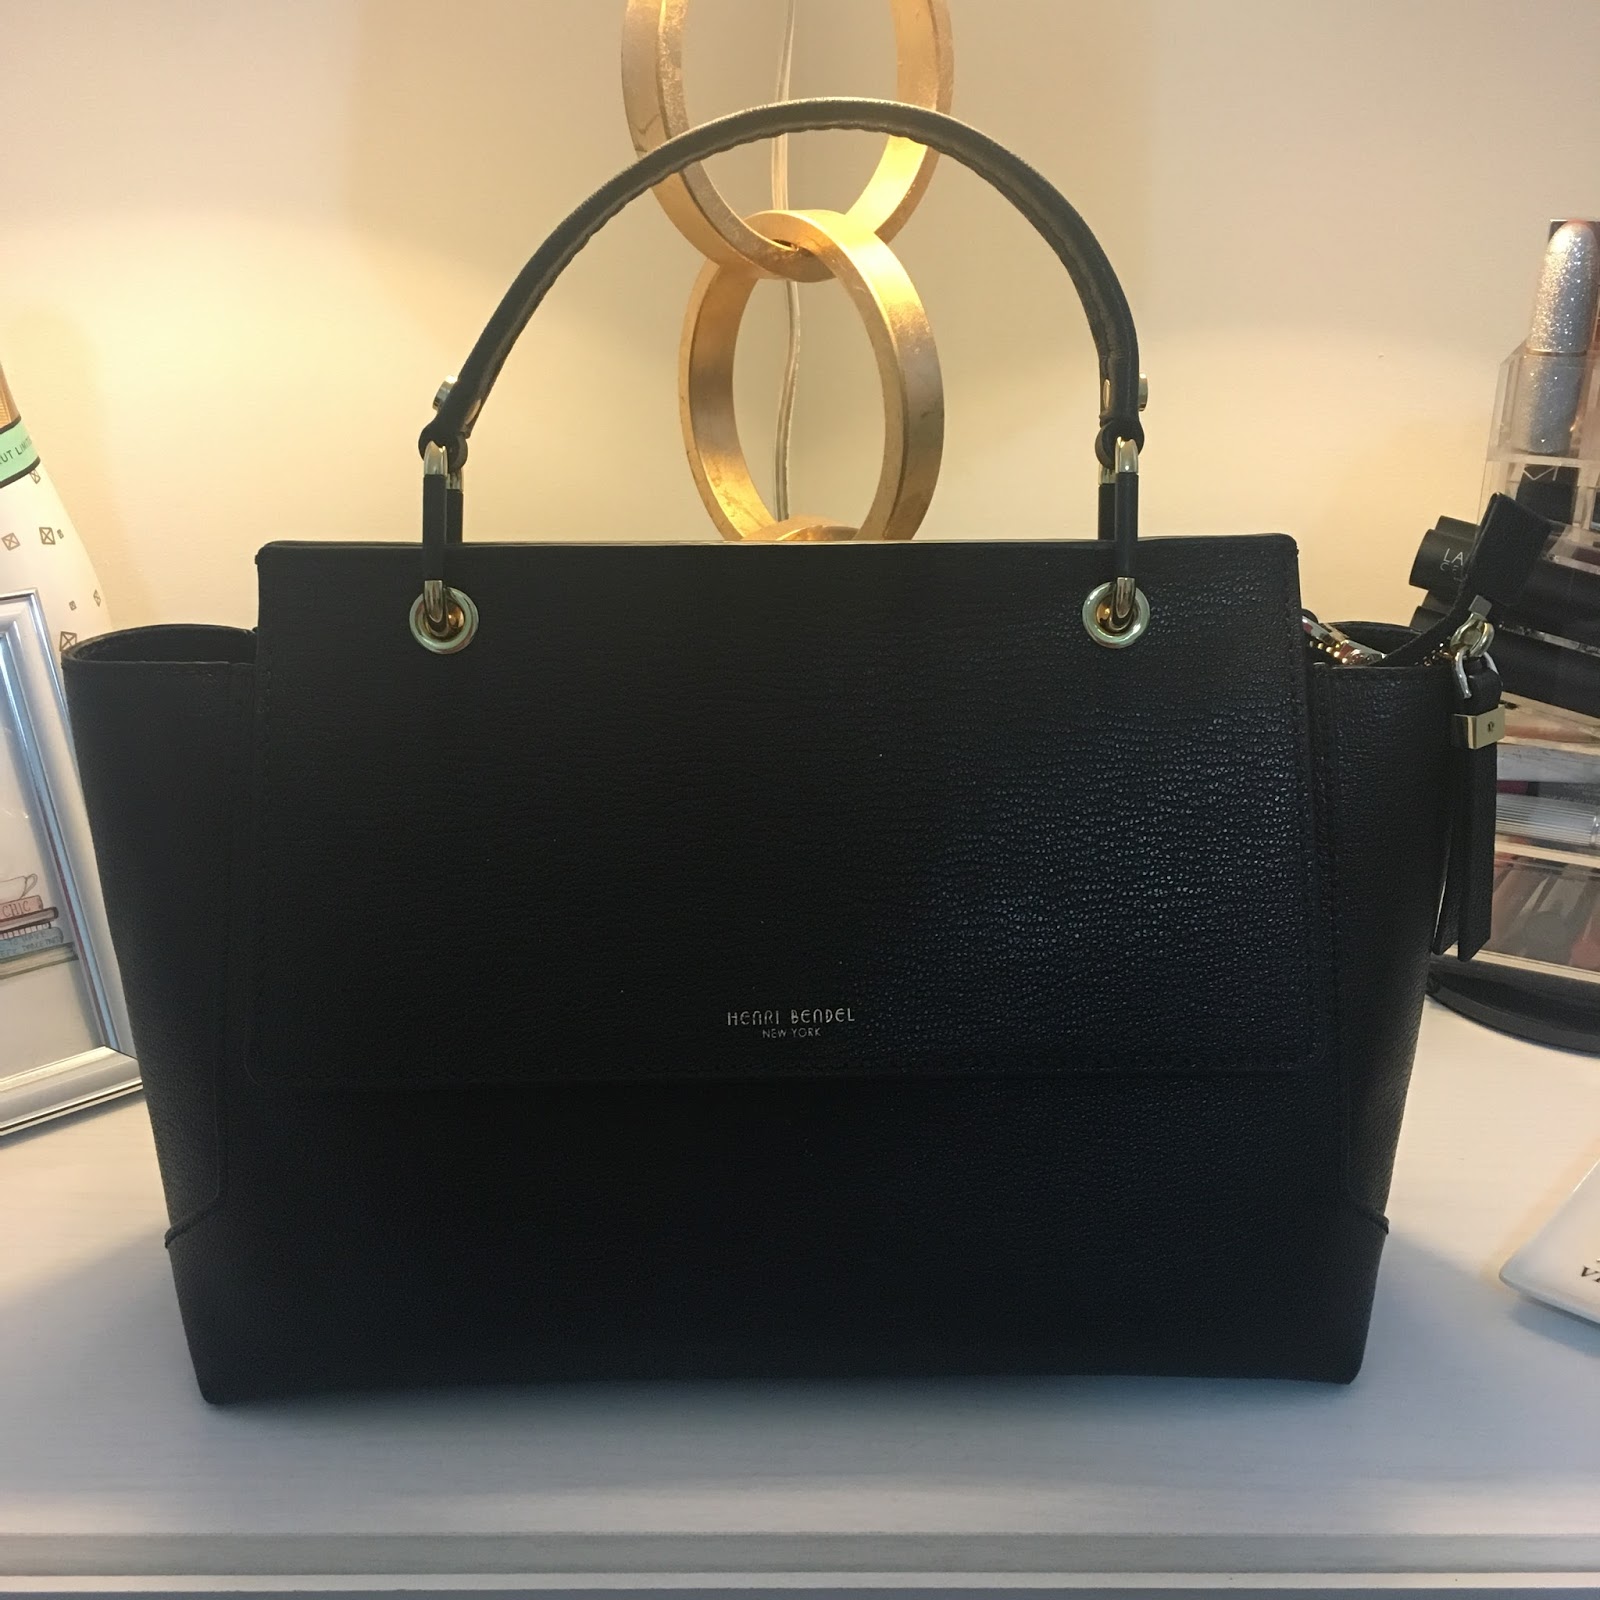 Chanel Business Affinity Bag Review & What Fits & Pros and Cons 